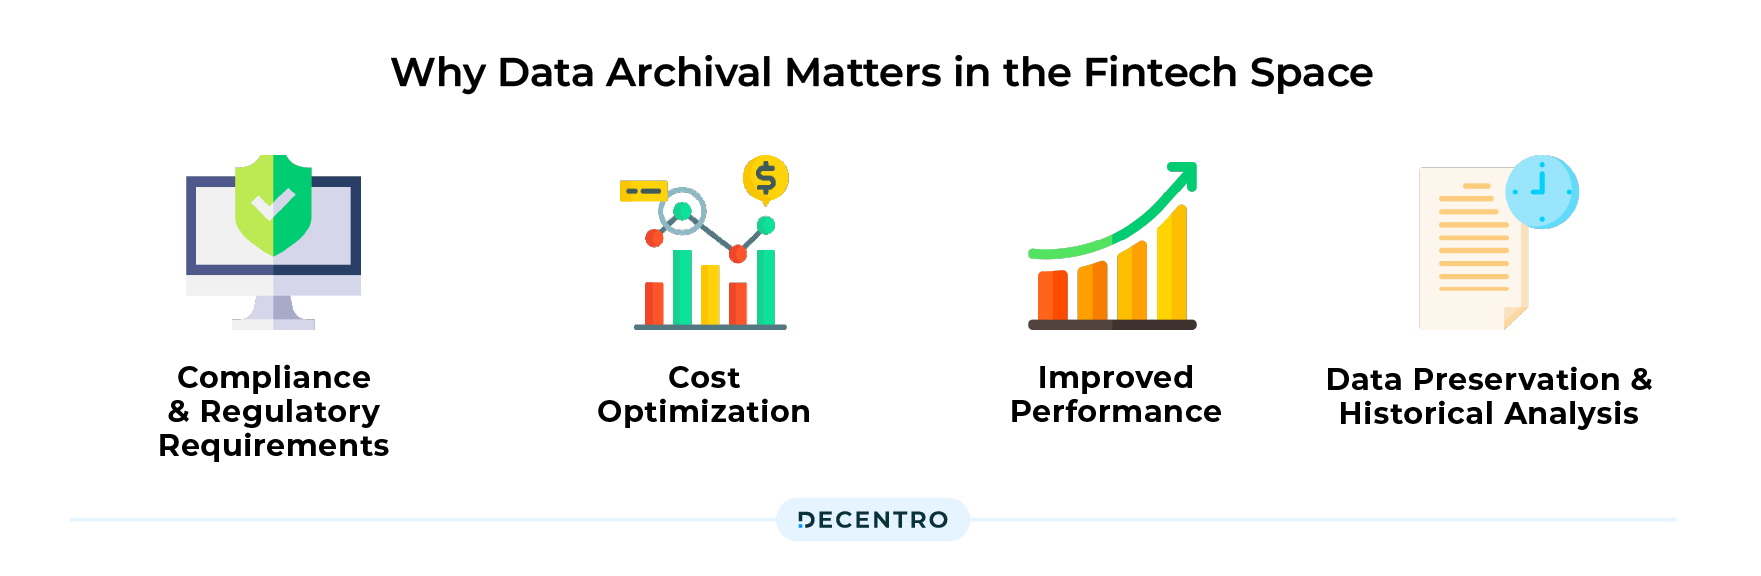 Why Data Archival Matters in the Fintech Space